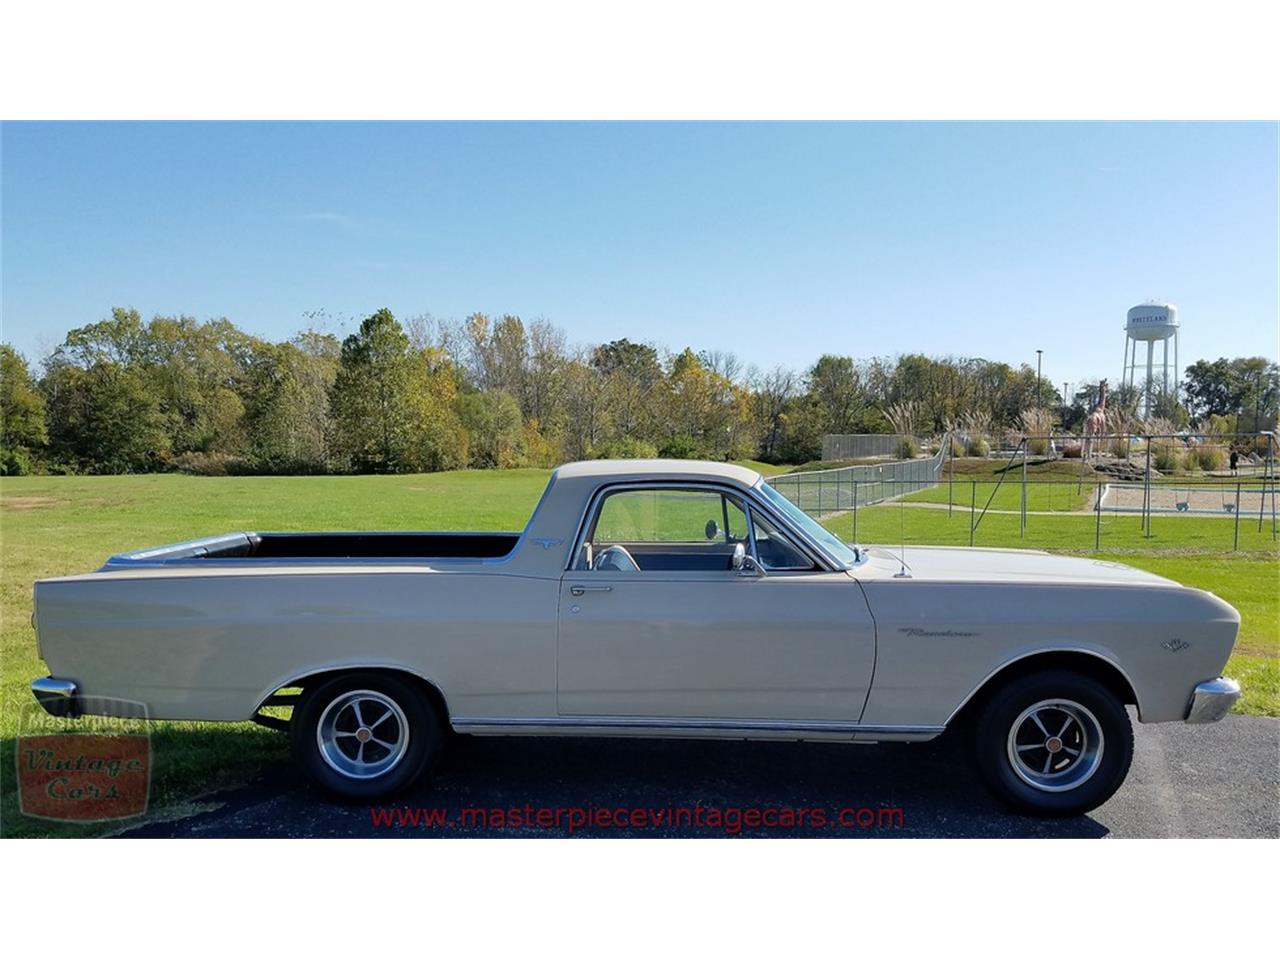 1966 ford ranchero for sale classiccars com cc 1048687 1966 ford ranchero for sale